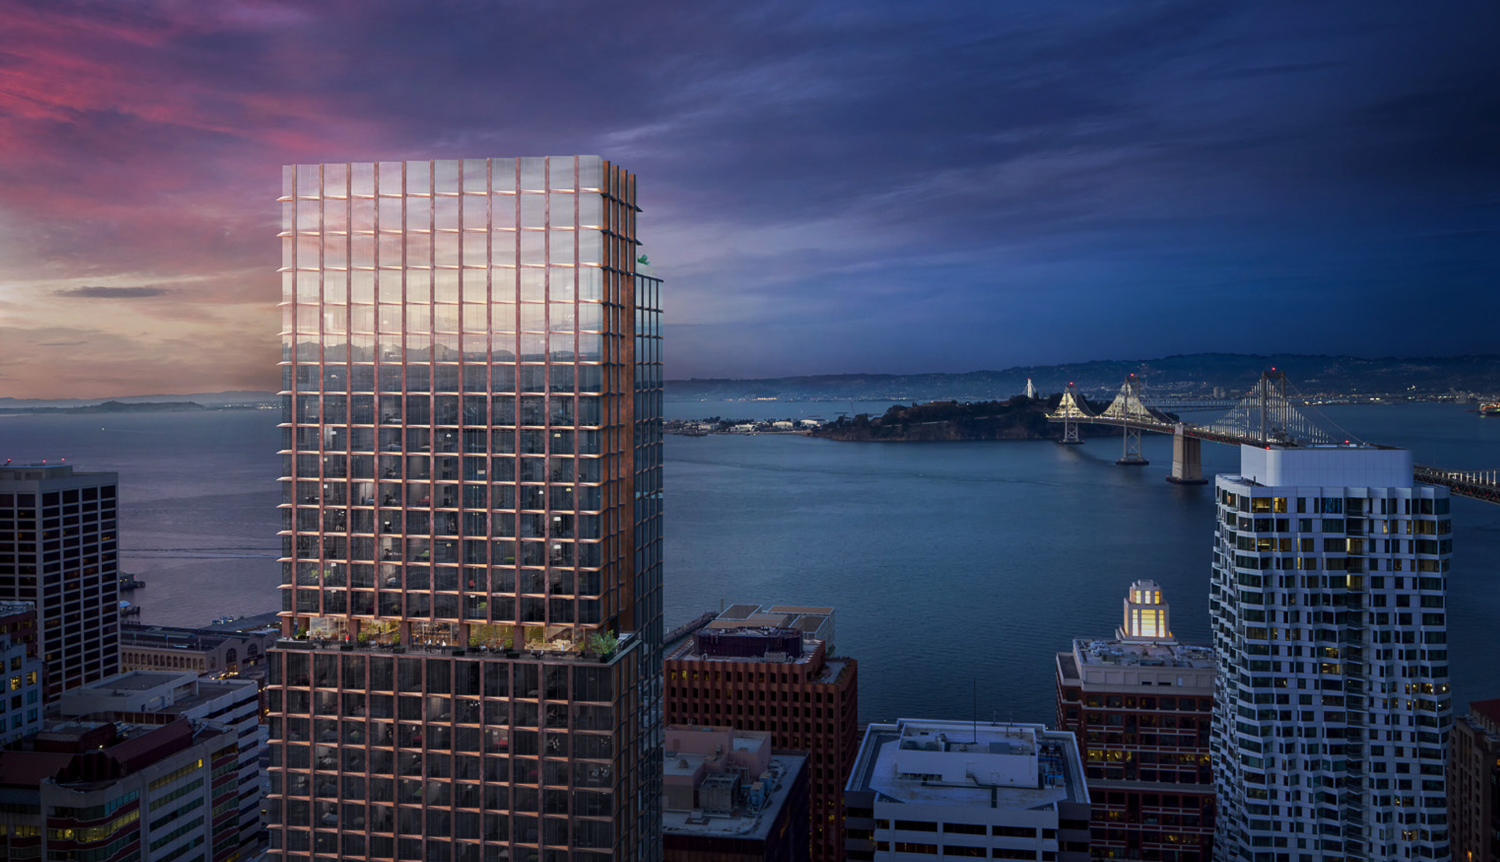 Transbay Block 4 aerial sunset view, architecture by Solomon Cordwell Buenz